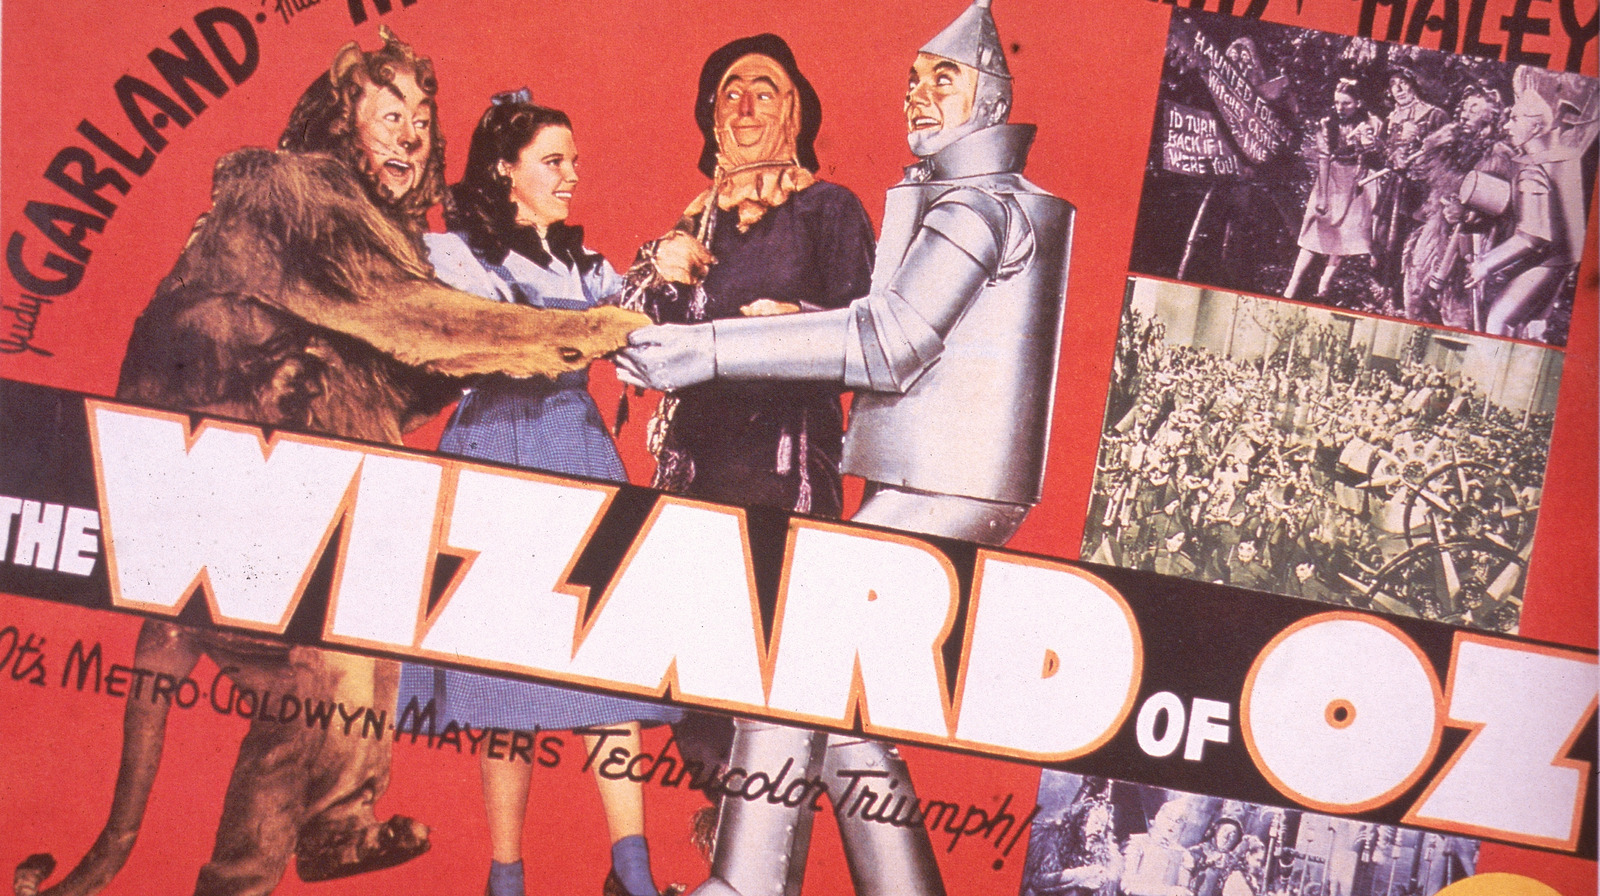 The Wizard of Oz Set Secrets: Everything You Want to Know